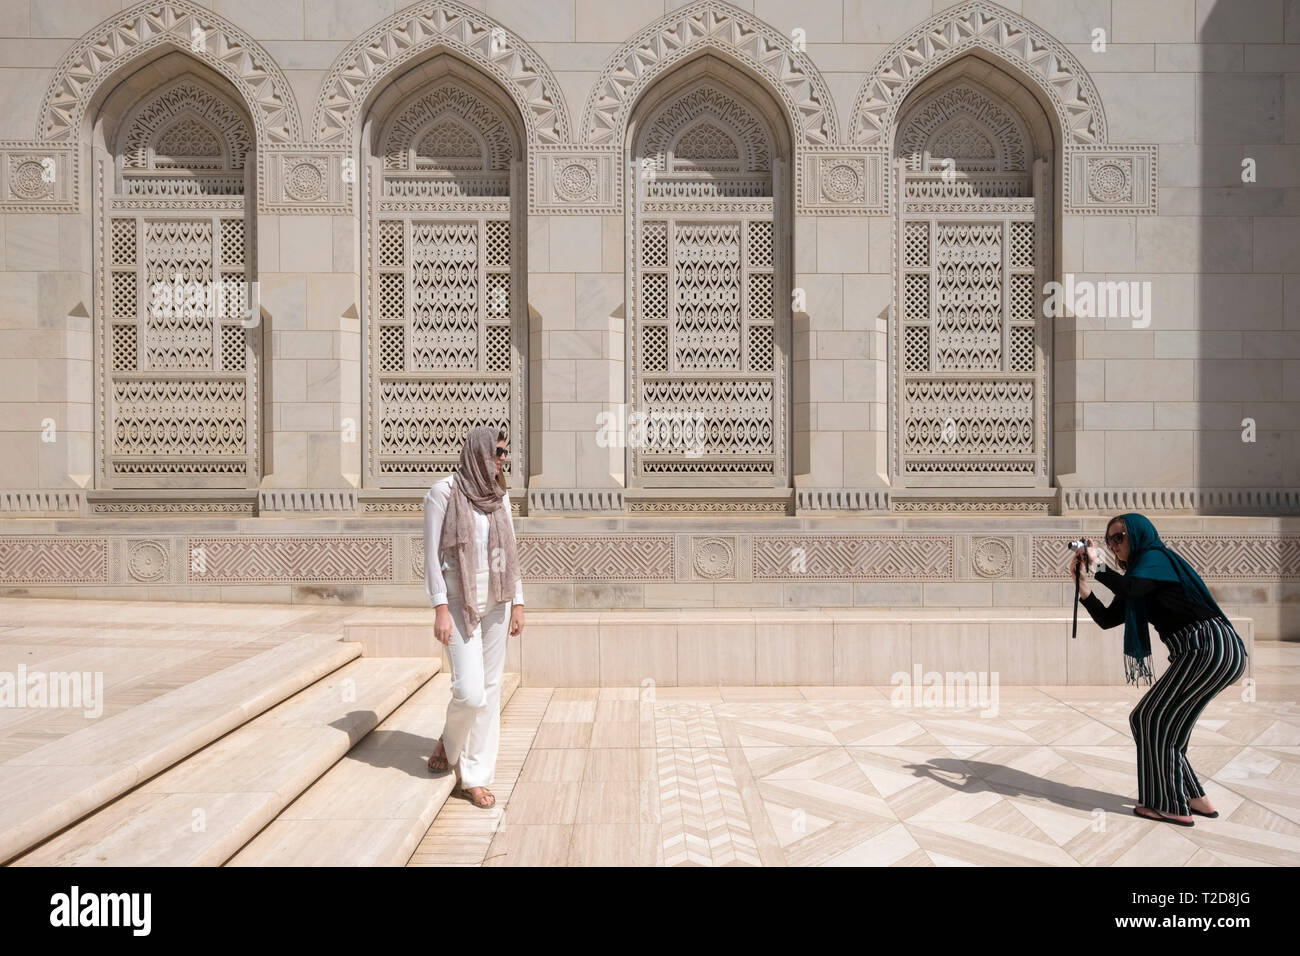 Tourist posing for photos at the Sultan Qaboos Grand Mosque, Muscat, Oman Stock Photo